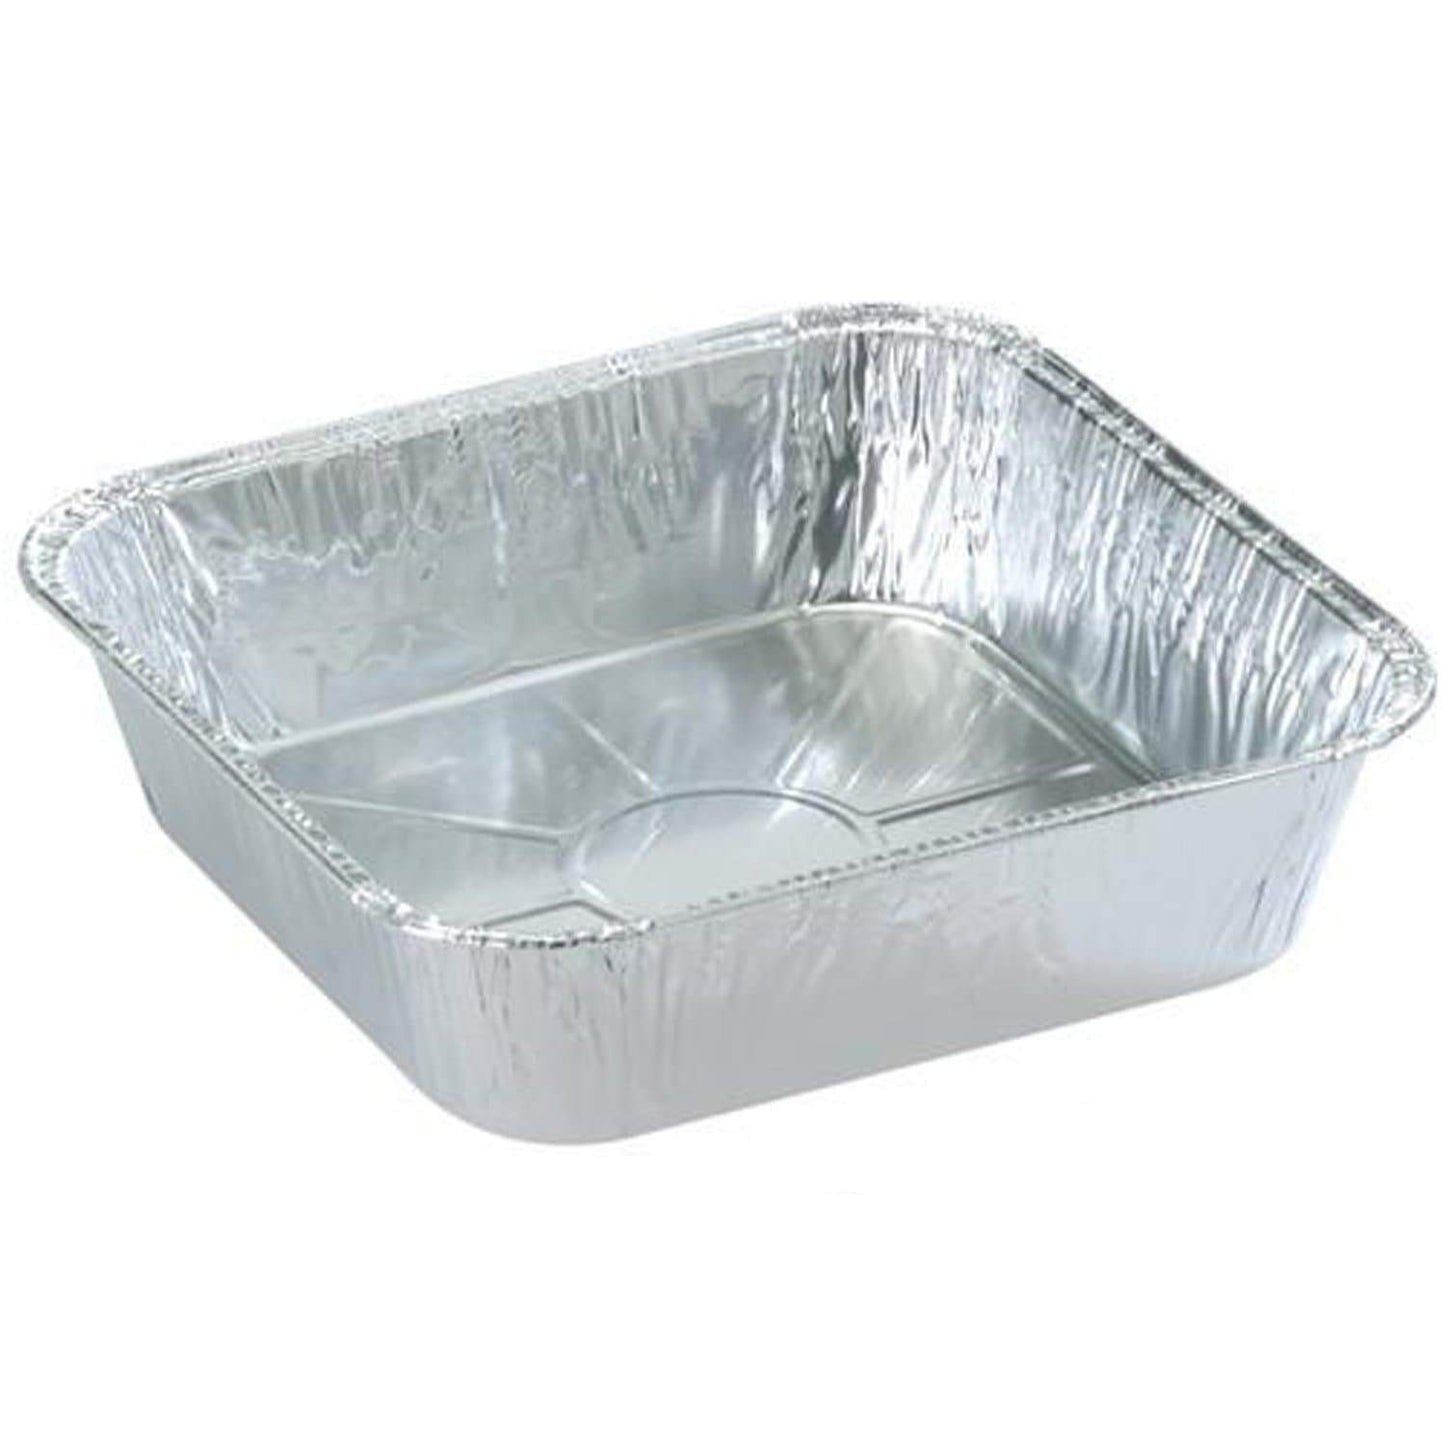 8x8 Disposable Aluminum Pans With Lids - 10 Pack Foil Pans For Cooking,  Baking Cakes, Roasting & Homemade Breads - Disposable Food Containers With  Foil Lids